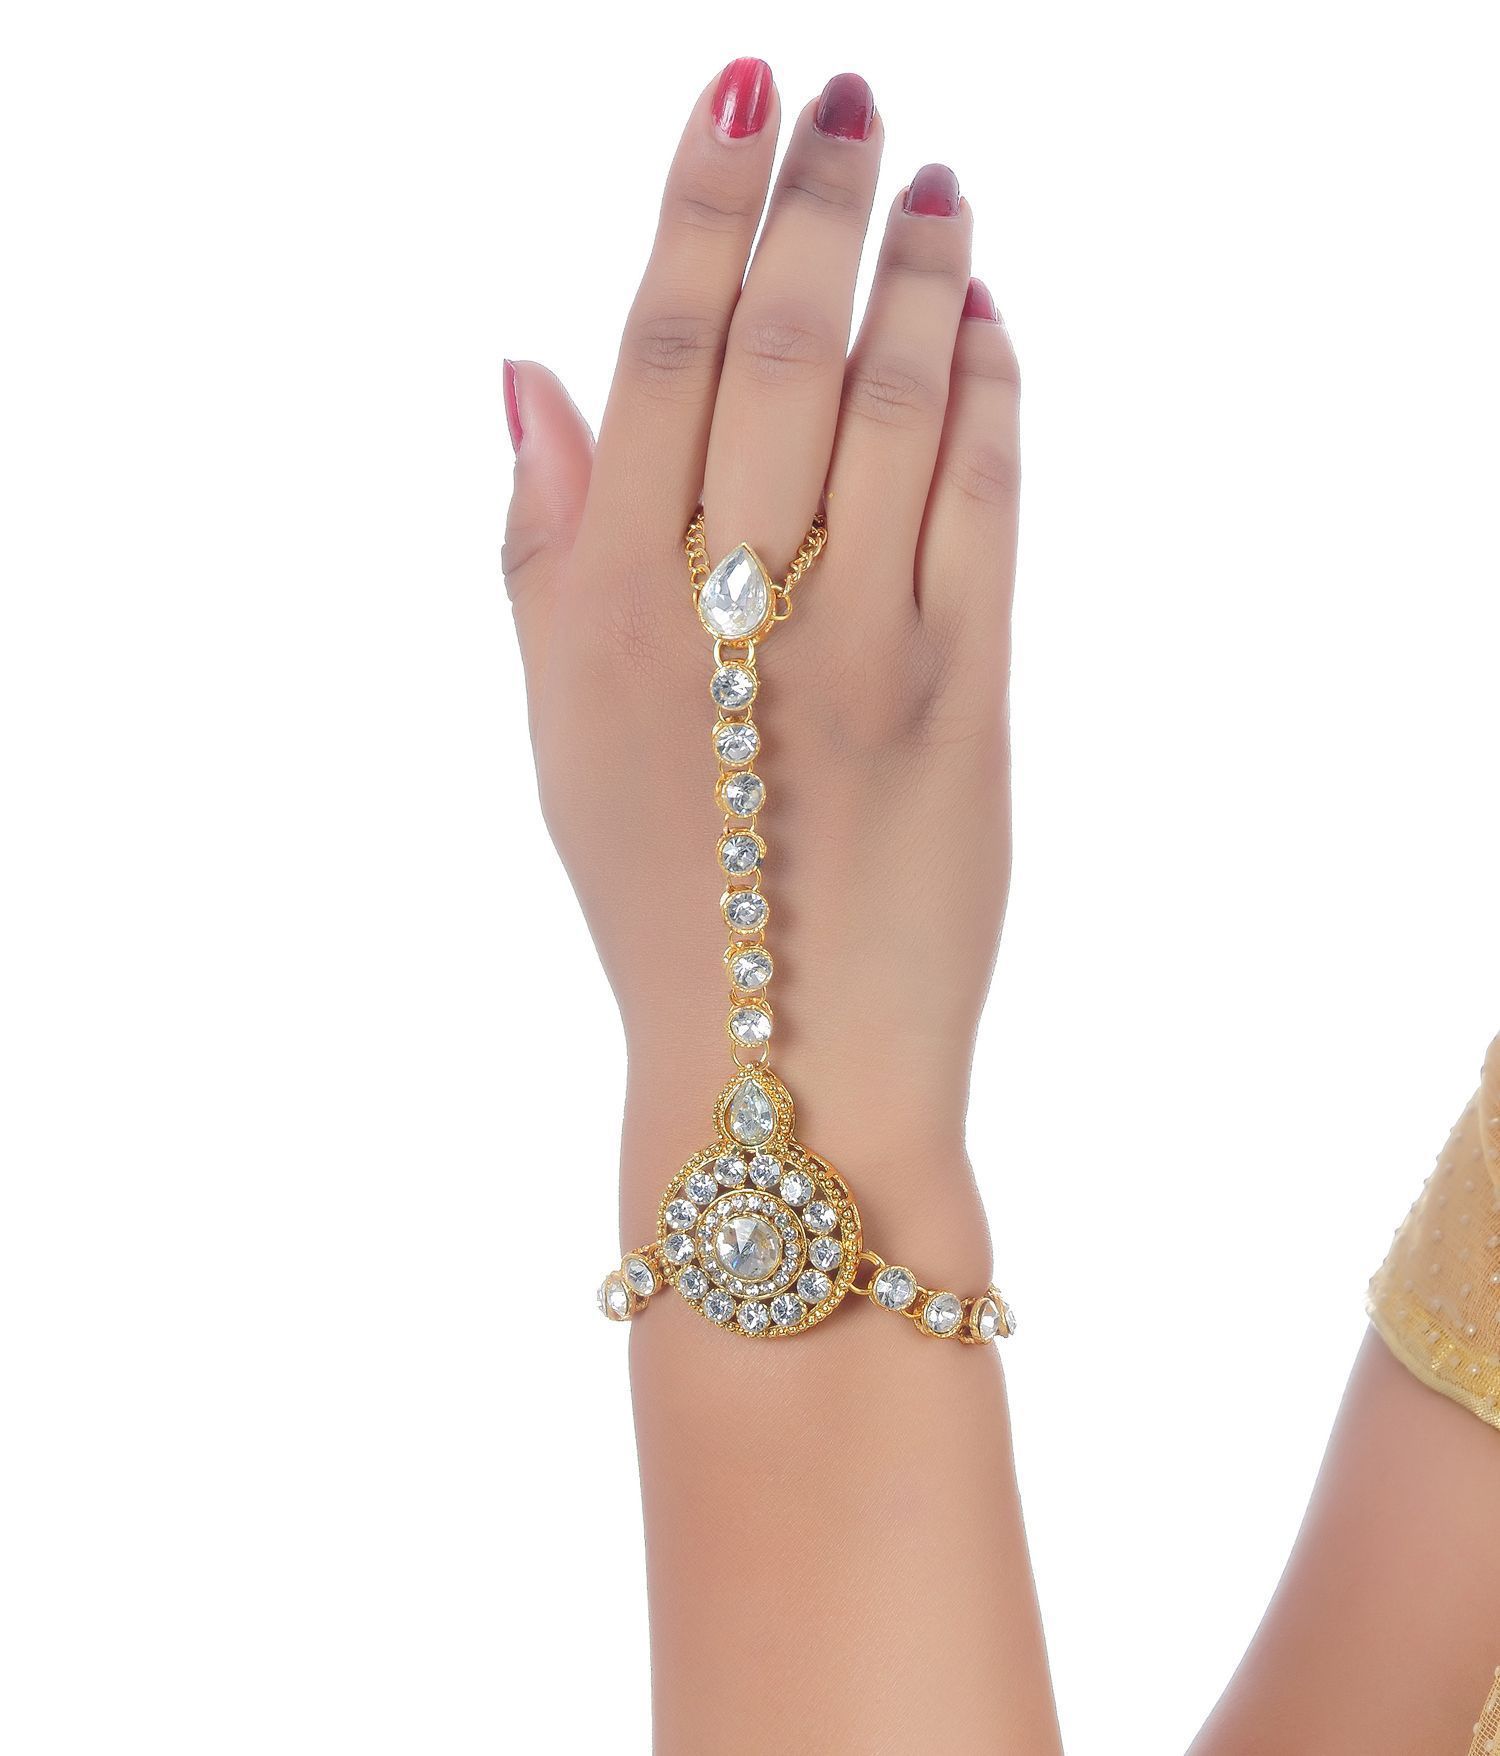 Indian Bride Hand Made Classic Bracelet With Finger Ring Gold Finishing  With White Stone - RICH LADY - 1653119